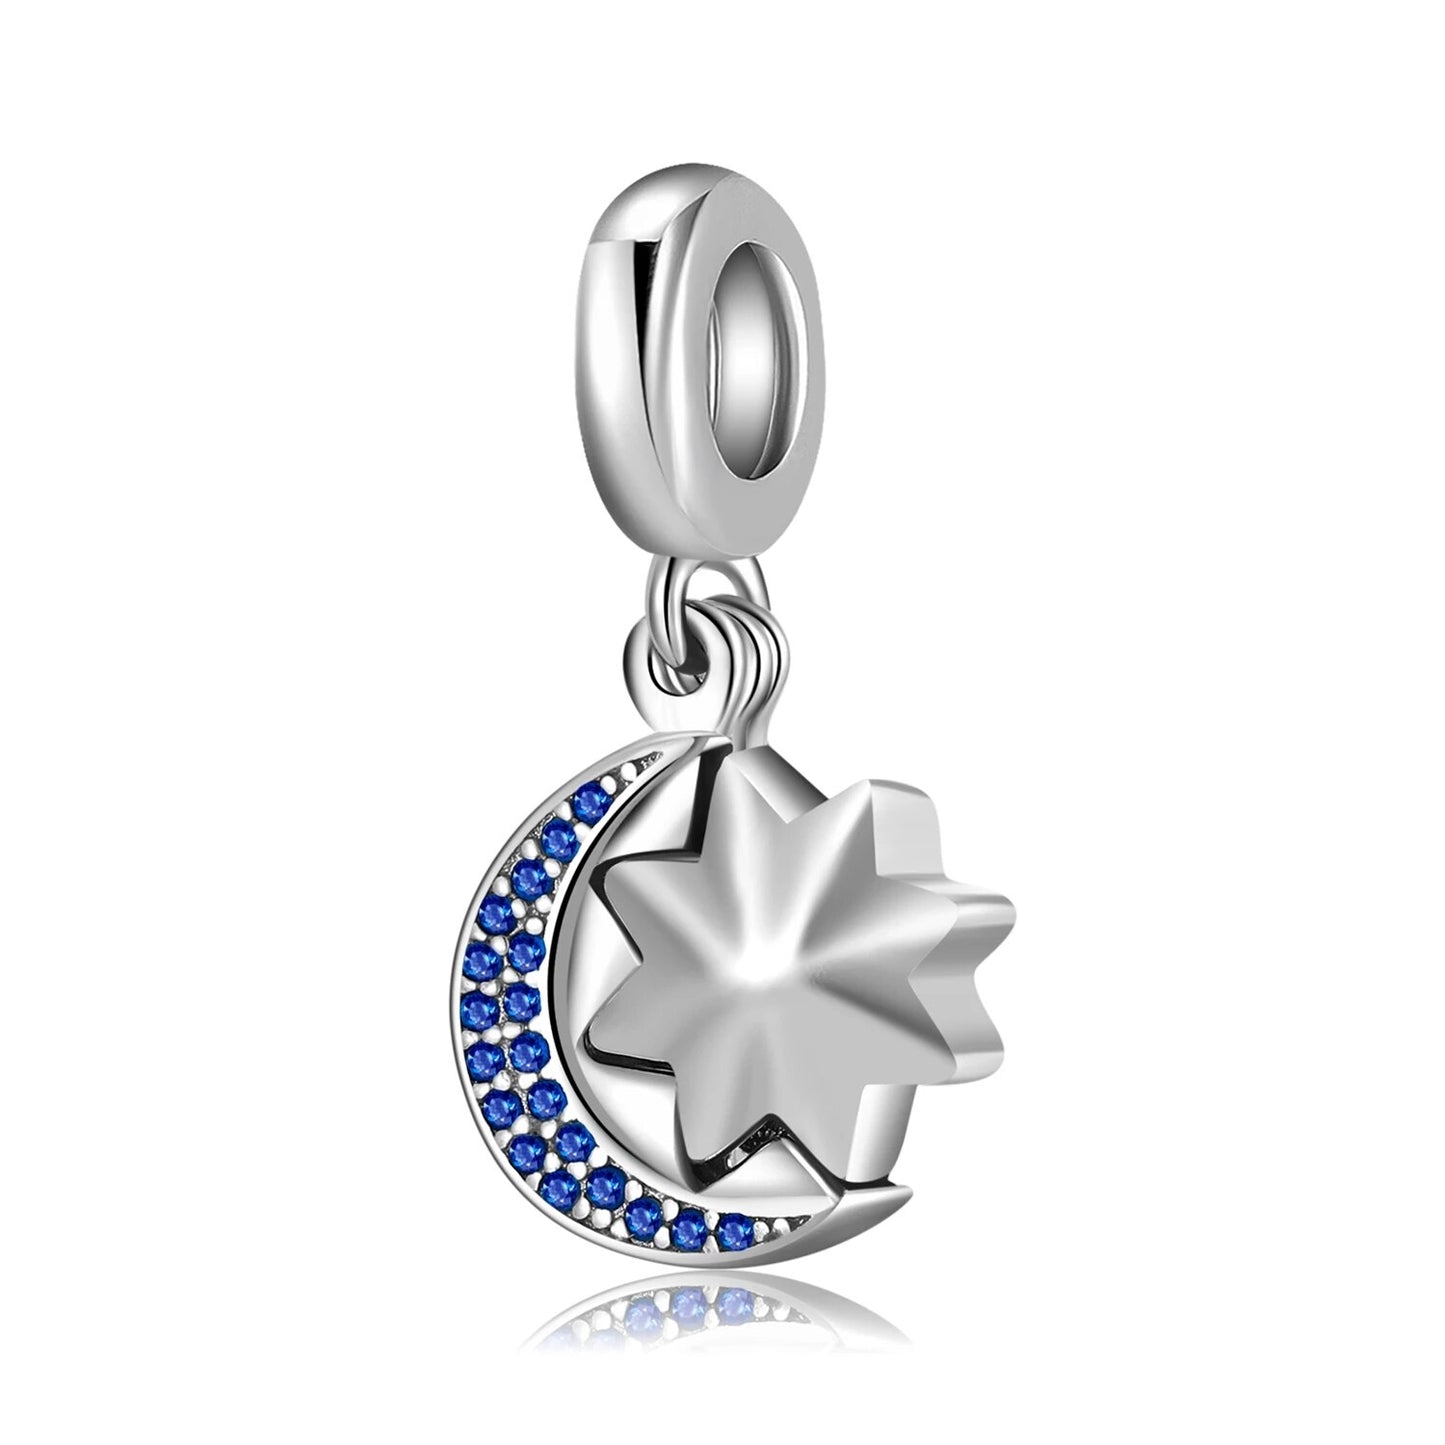 CHARM STERLING SILVER 925 LUNARE